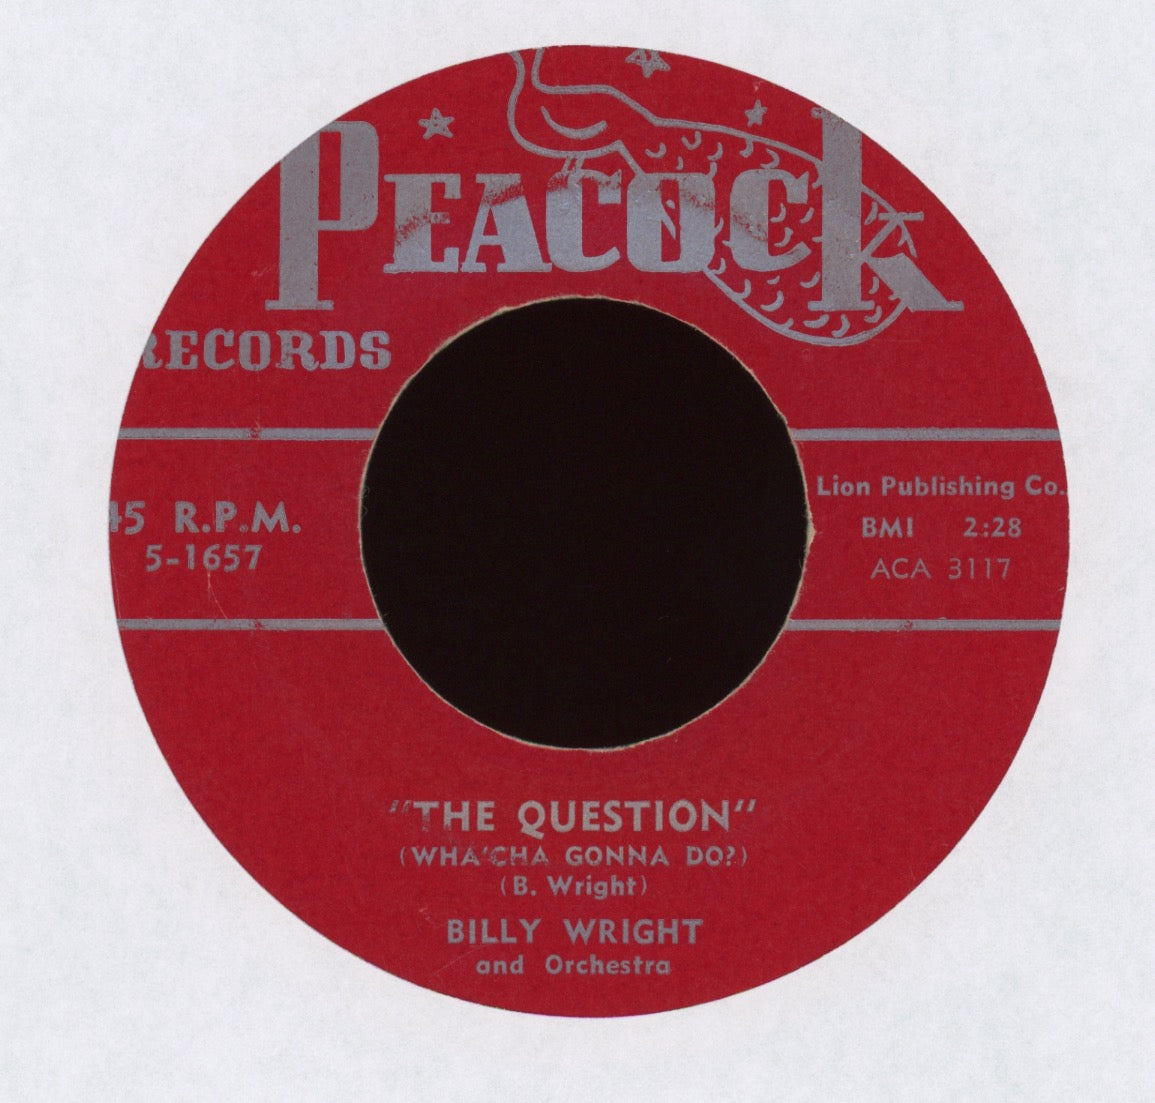 Billy Wright - The Question (Whatcha Gonna Do?) on Peacock